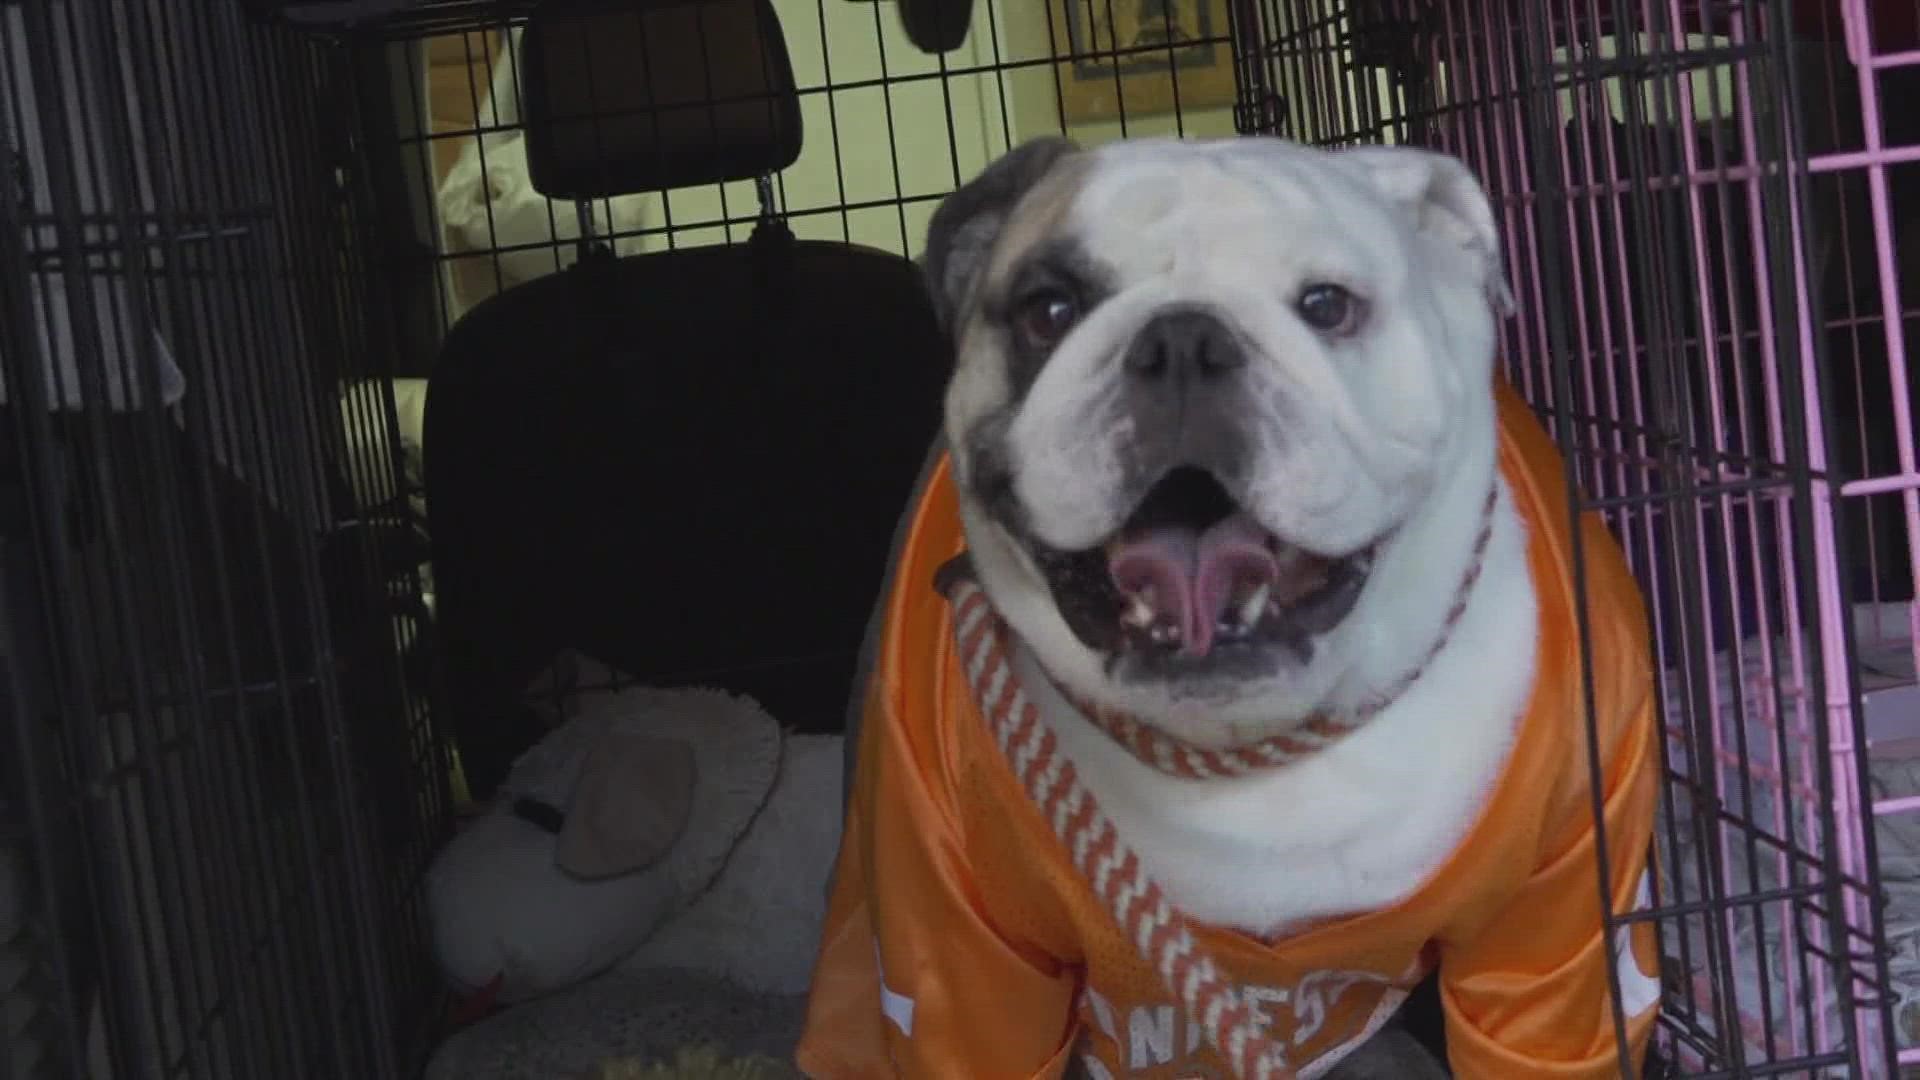 What do you do if you're a lifelong Tennessee fan, but have a lifelong love of bulldogs? You proudly parade them dressed tongue to tail in orange!